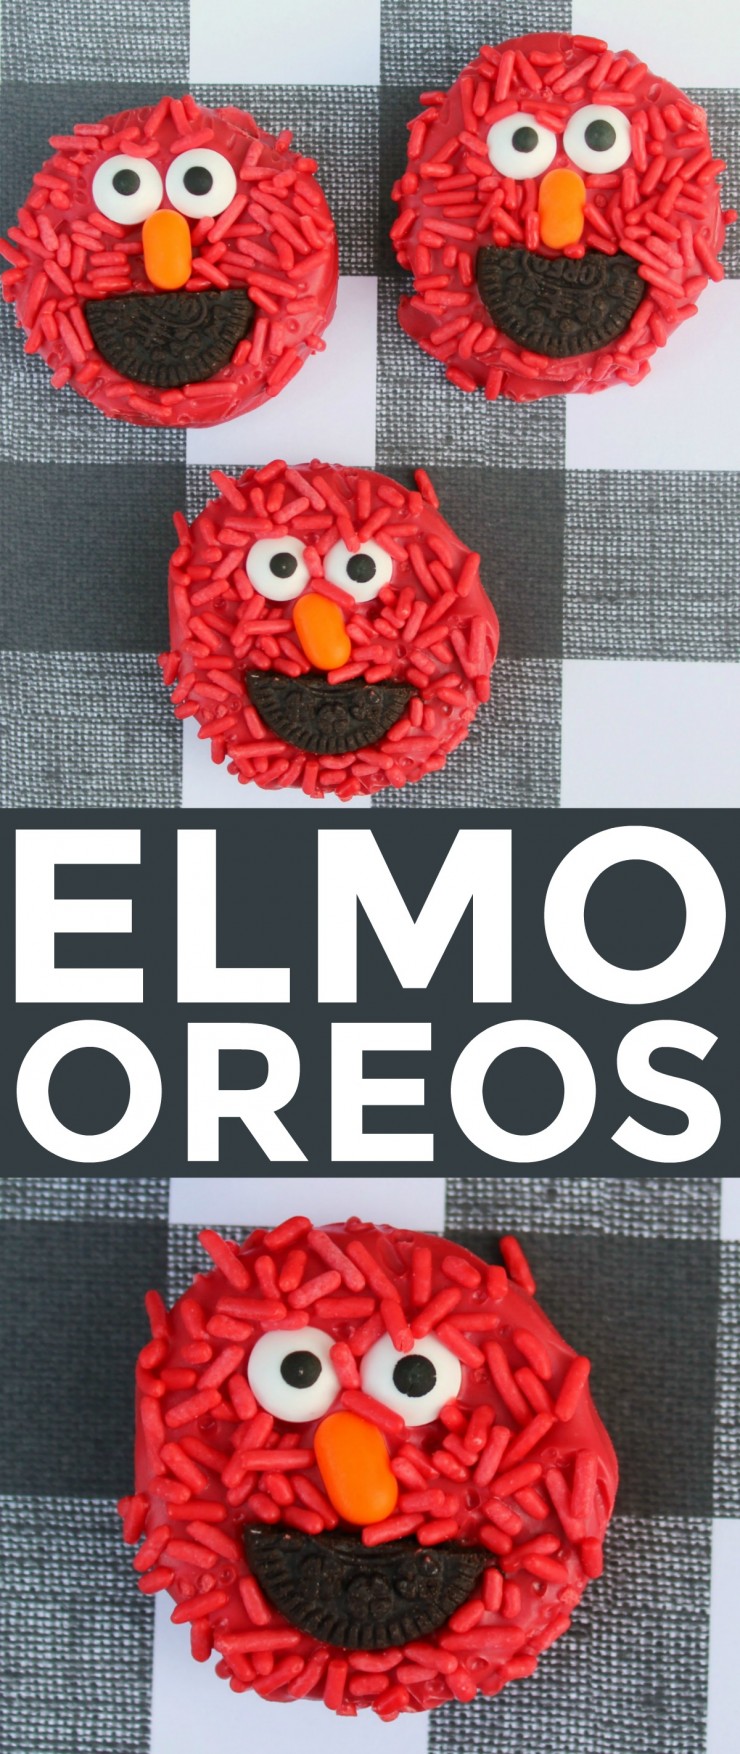 These Elmo Oreos are a fun treat for any little Sesame Street fan. They also make a great addition to any Sesame Street Birthday Party!